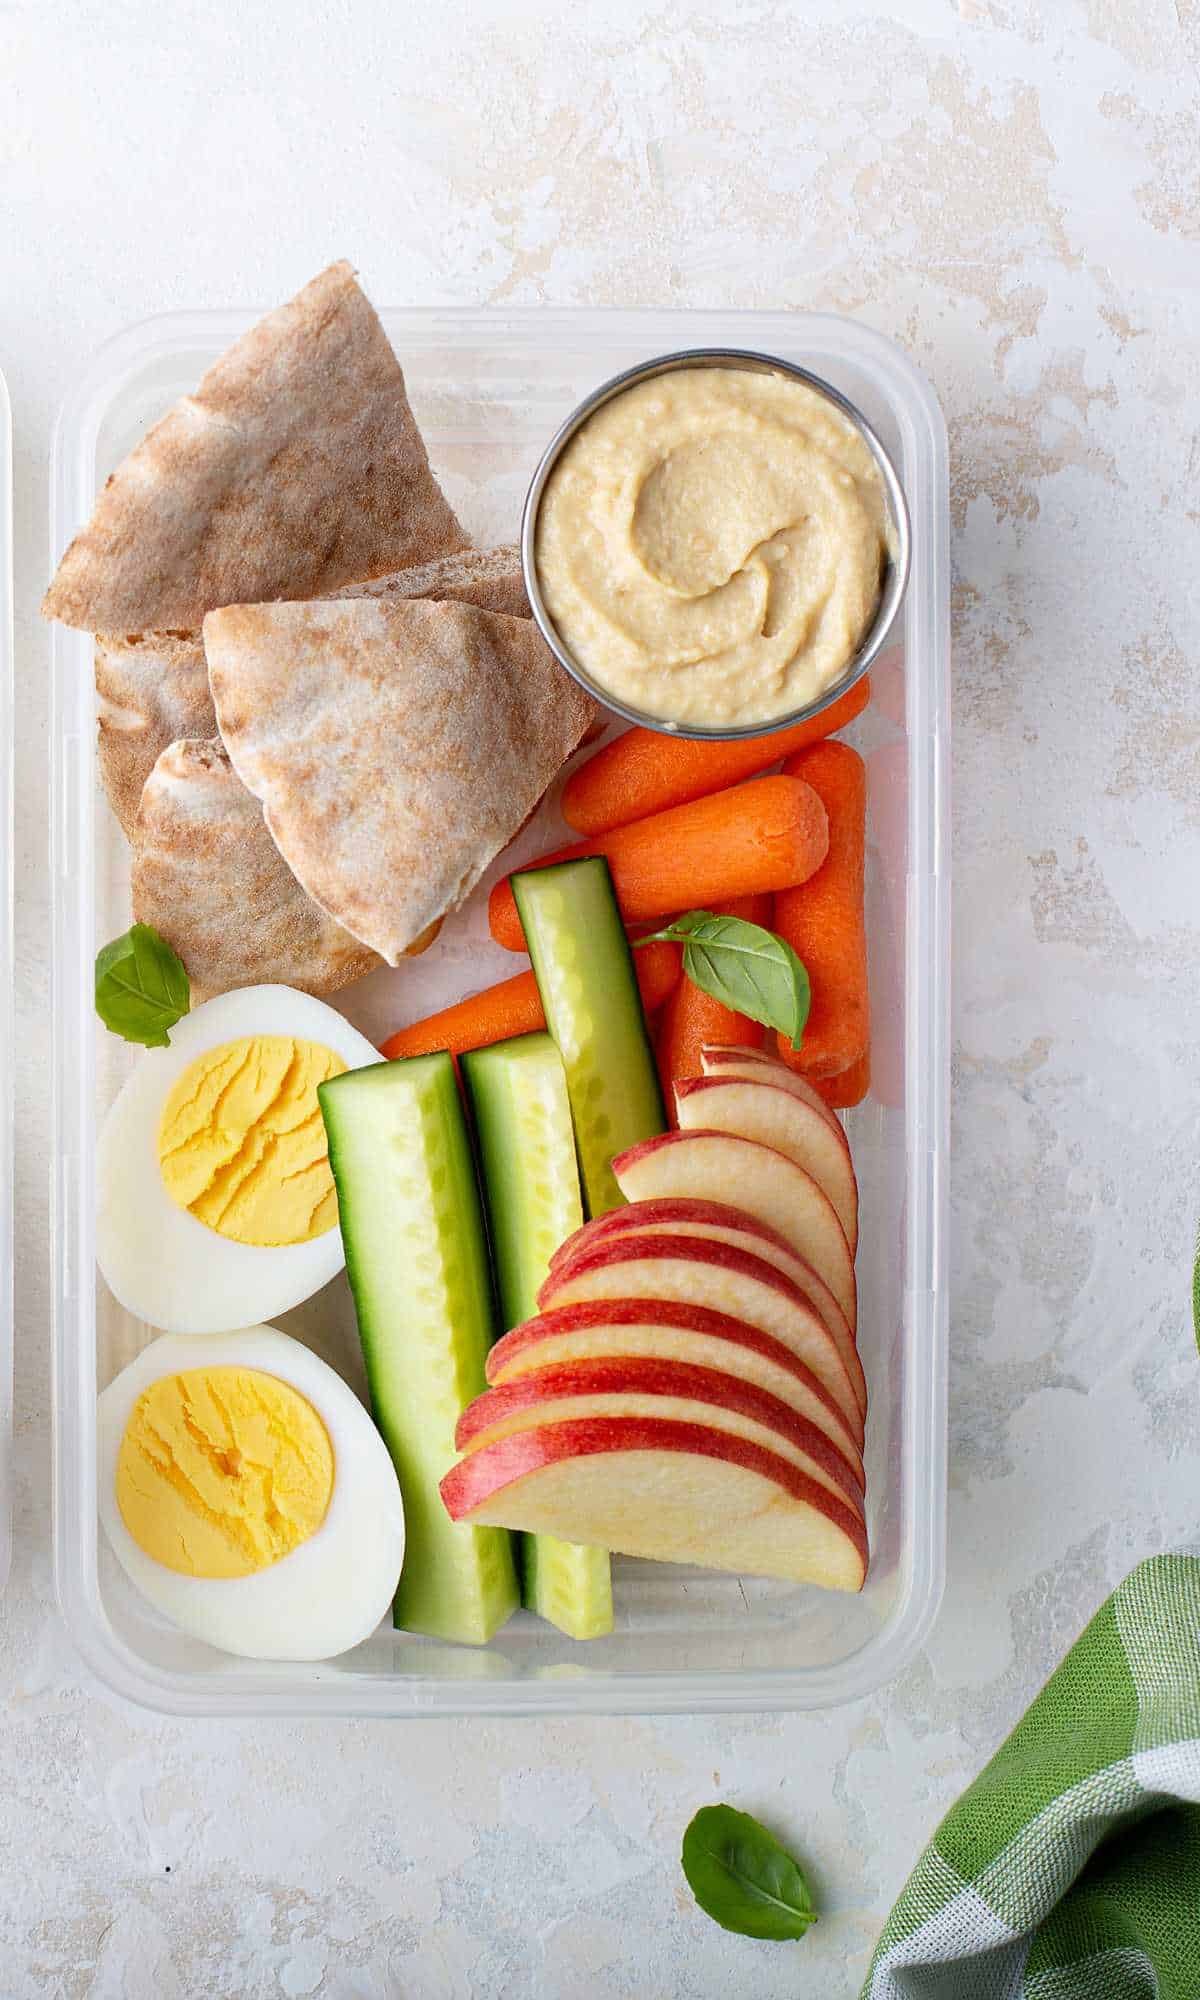 a container of healthy snacks for labor - eggs, apples, cucumbers, carrots, pita bread and hummus